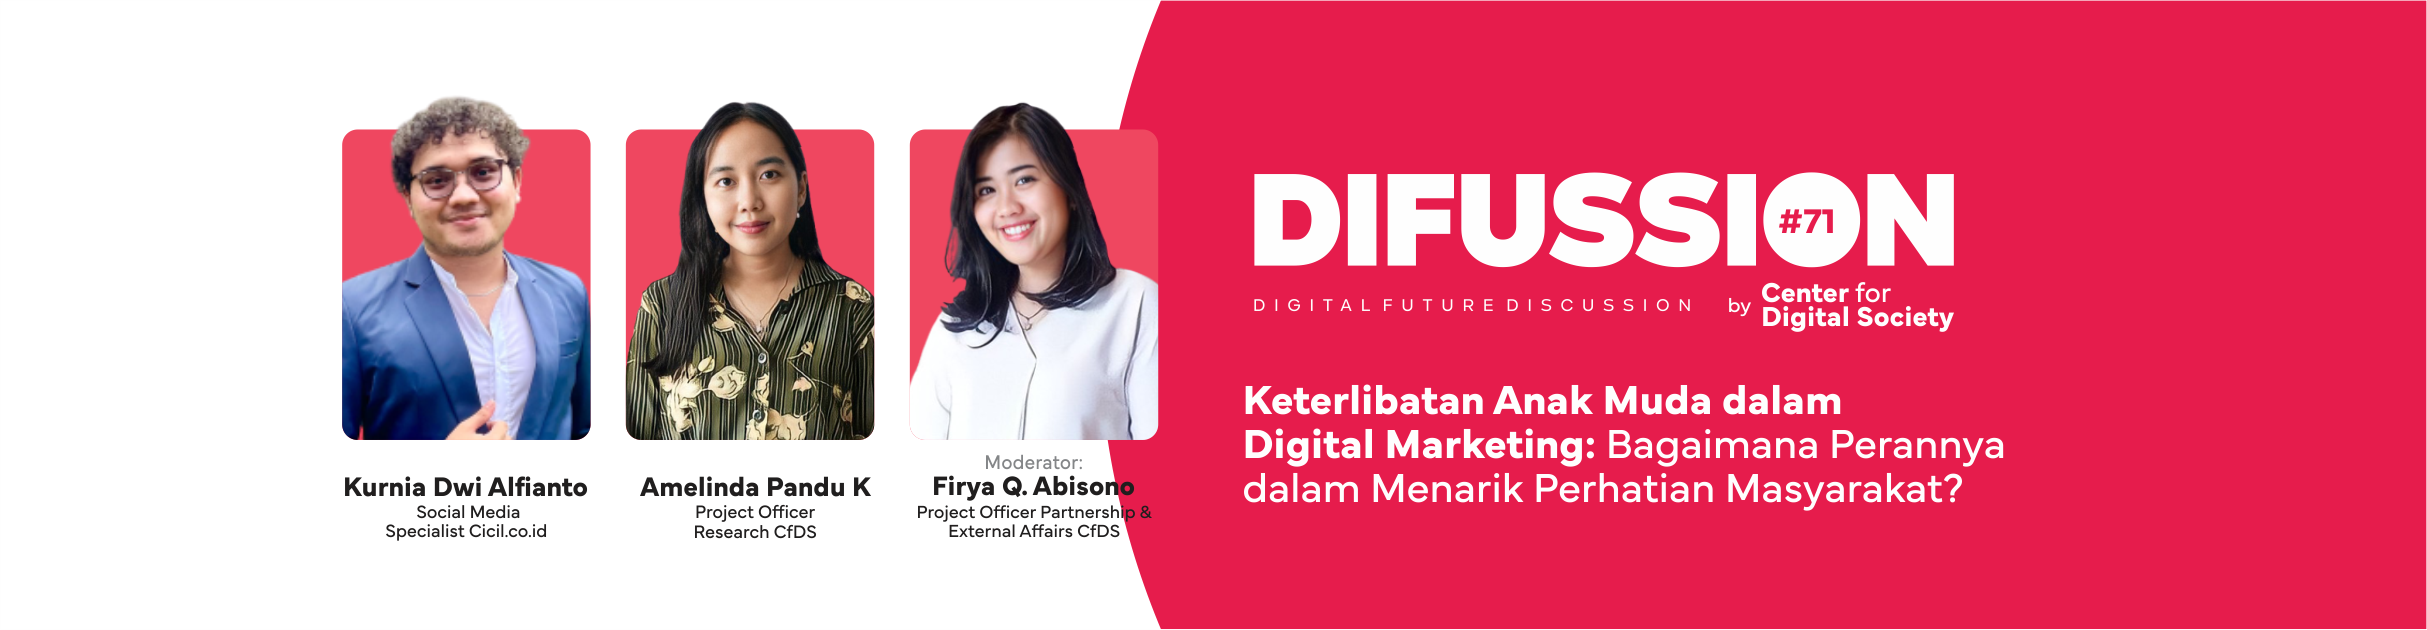 [PRESS RELEASE] Involvement of Youth in Digital Marketing: What is its Role in Attracting Public Attention? | Difussion #72 in x CICIL